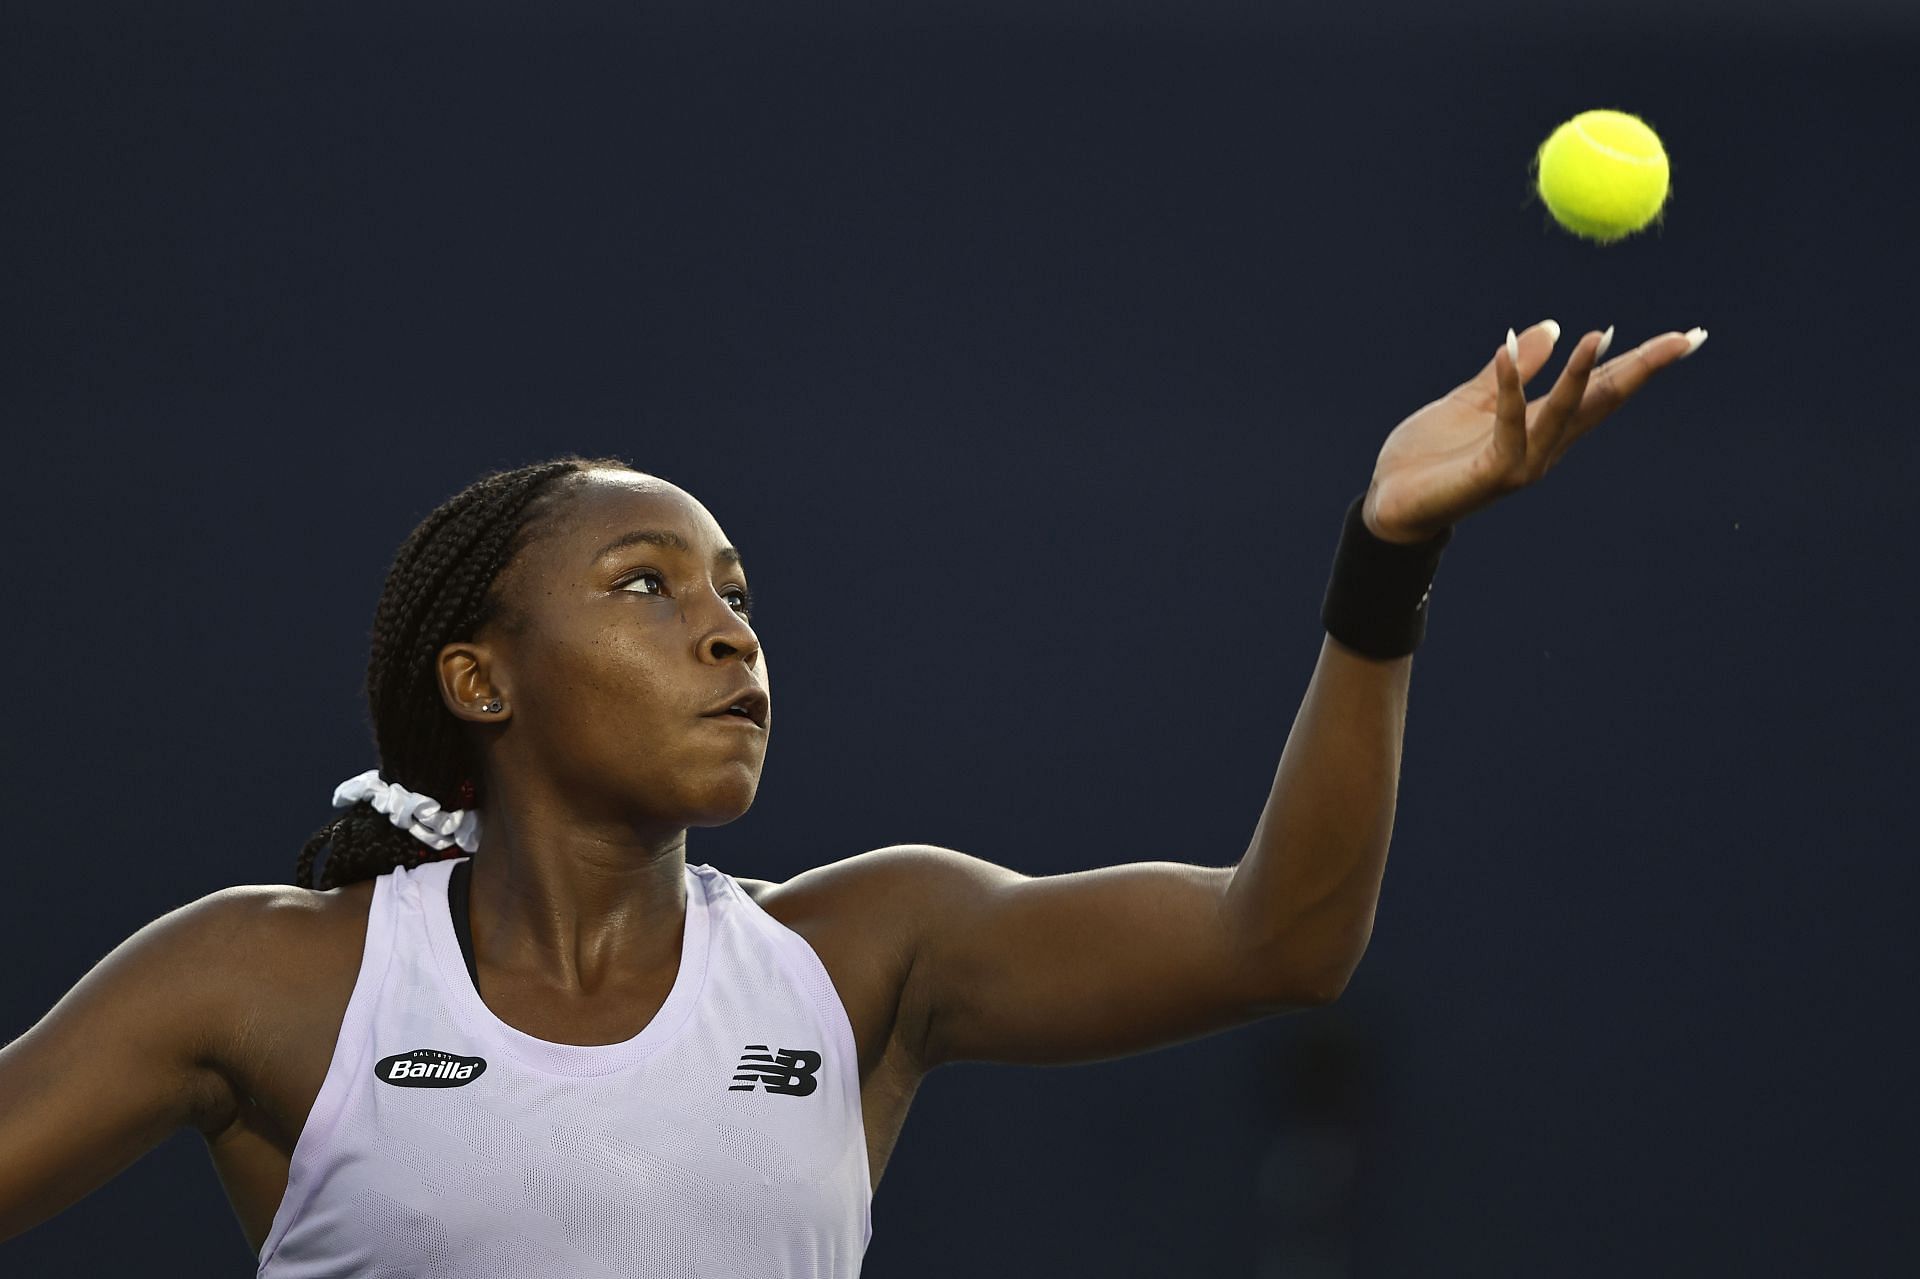 Coco Gauff makes her debut as a top-10 player at the San Diego Open